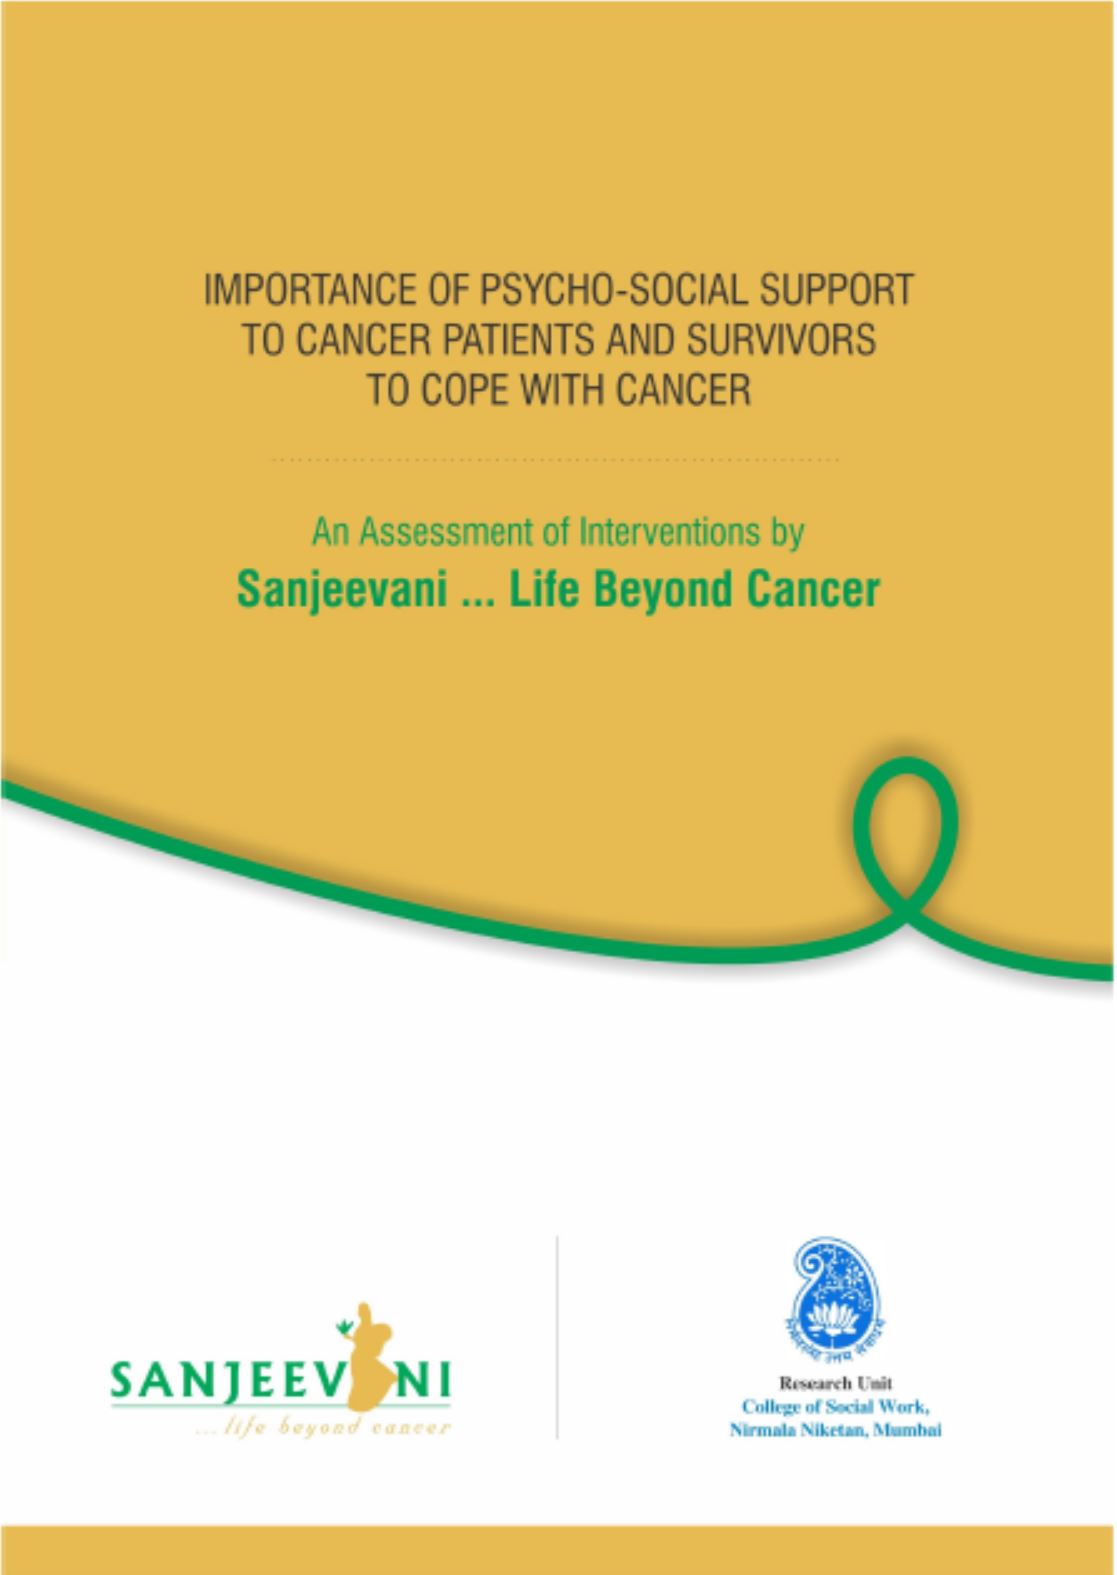 Importance of PsychoSocial Care